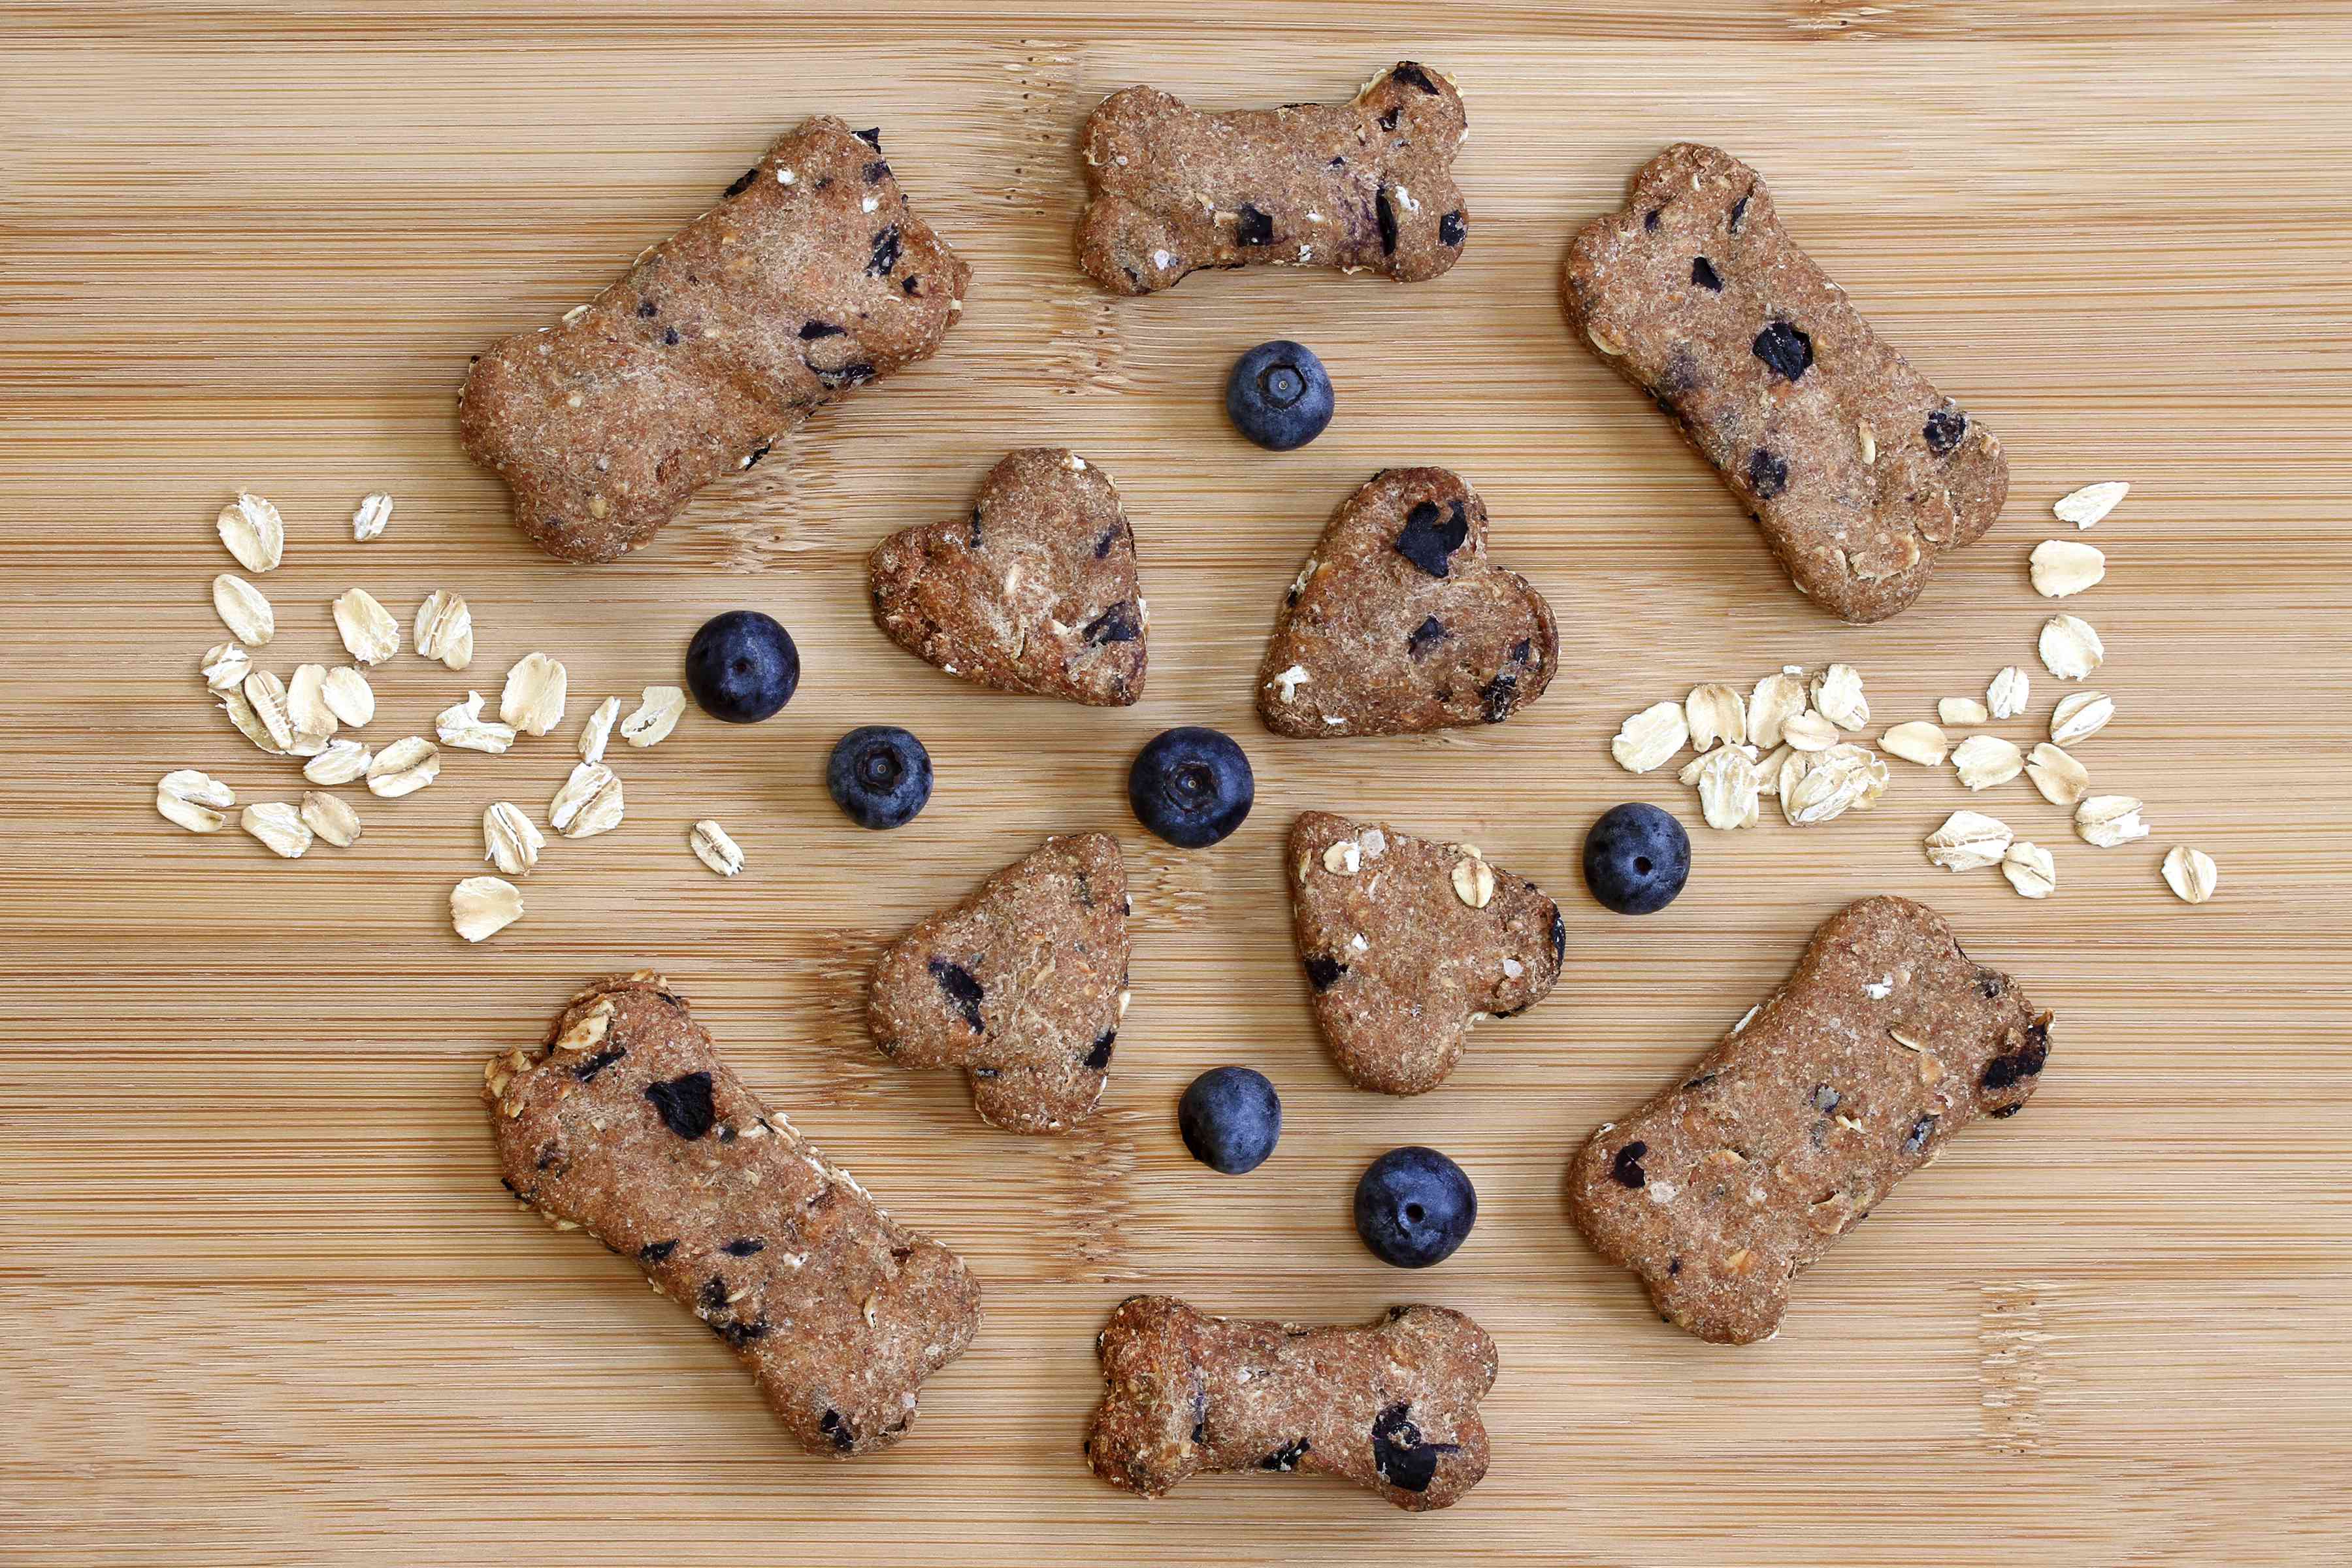 Heart and bone shaped blueberry dog treats arranged on a wooden board.